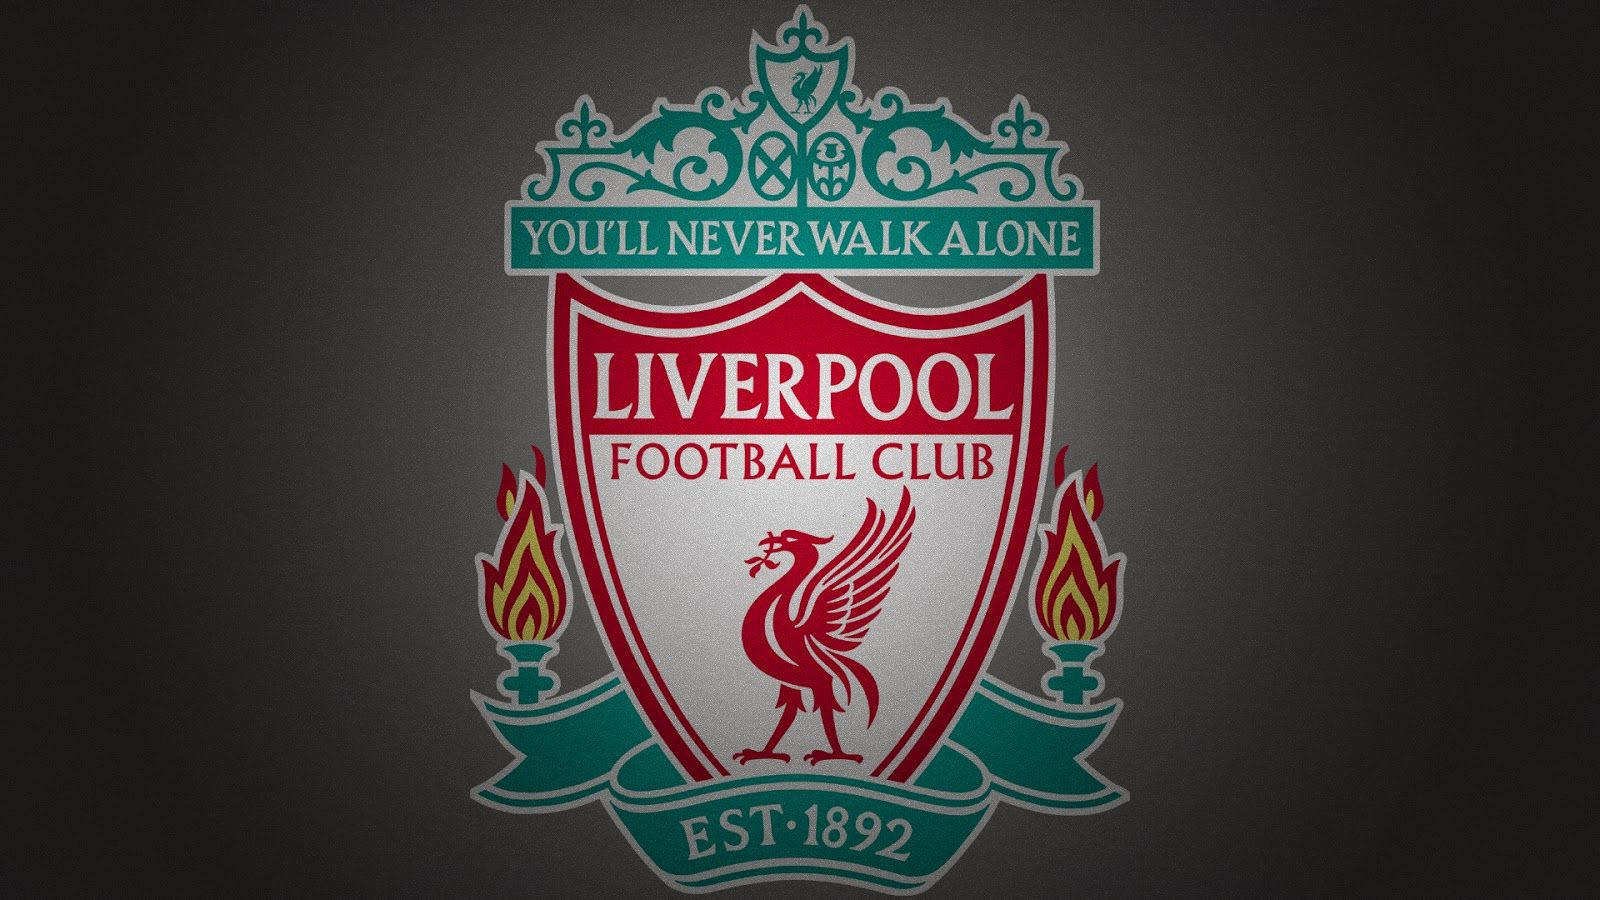 Show your pride for Liverpool Football Club! Wallpaper